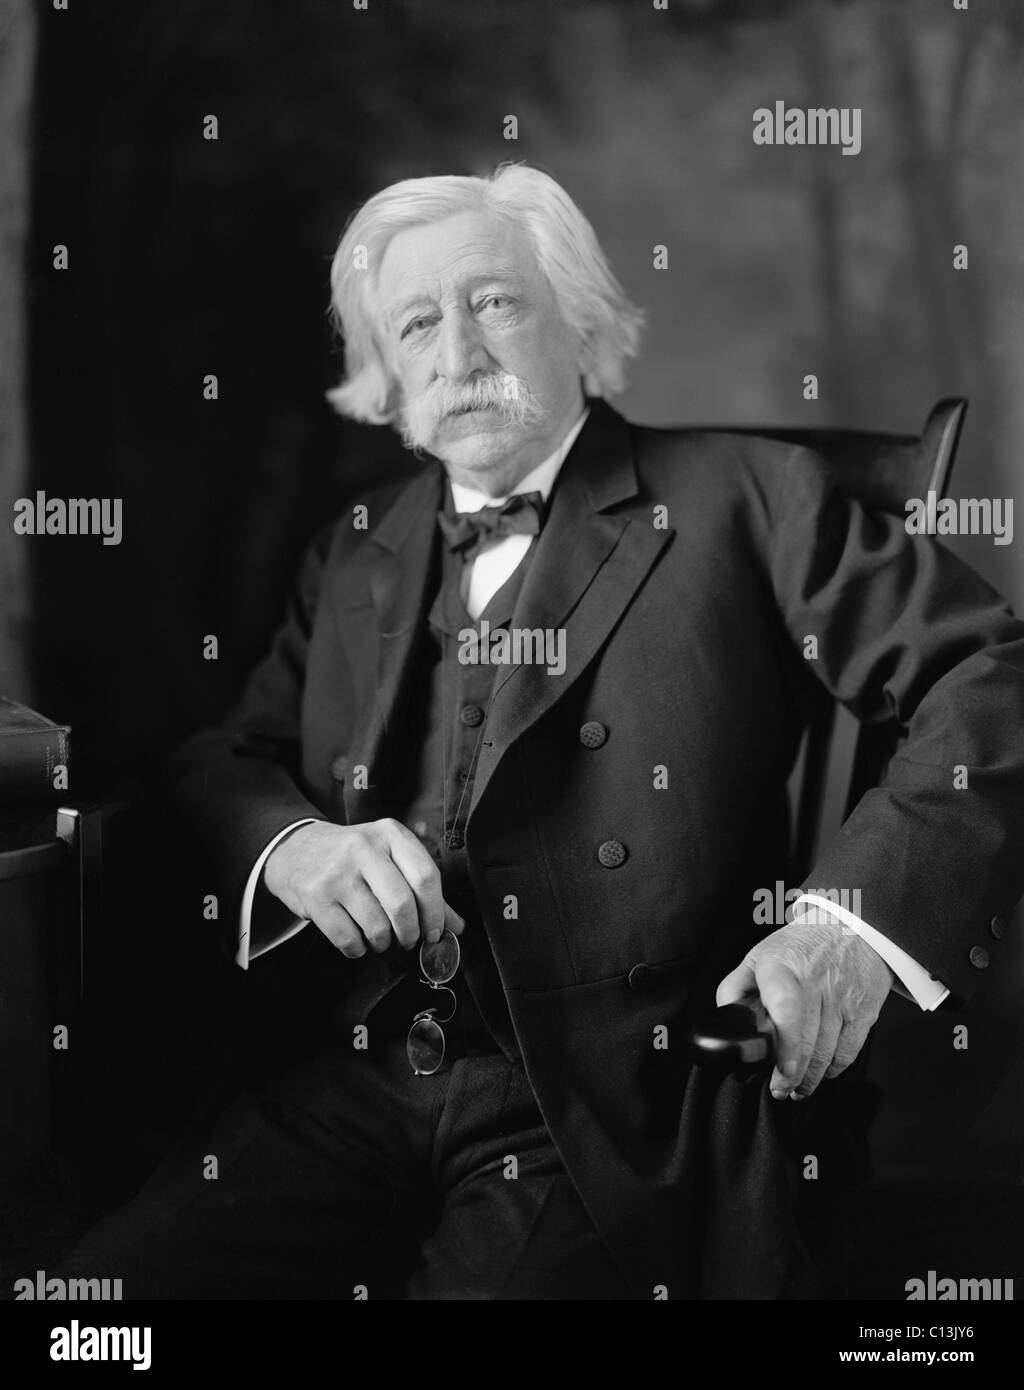 Melville W. Fuller (1833-1910), eighth Chief Justice of the United States Supreme Court from 1888 through 1910. The Fuller Court decided in favor of racial segregation in the Plessy v. Ferguson case of 1896. Stock Photo